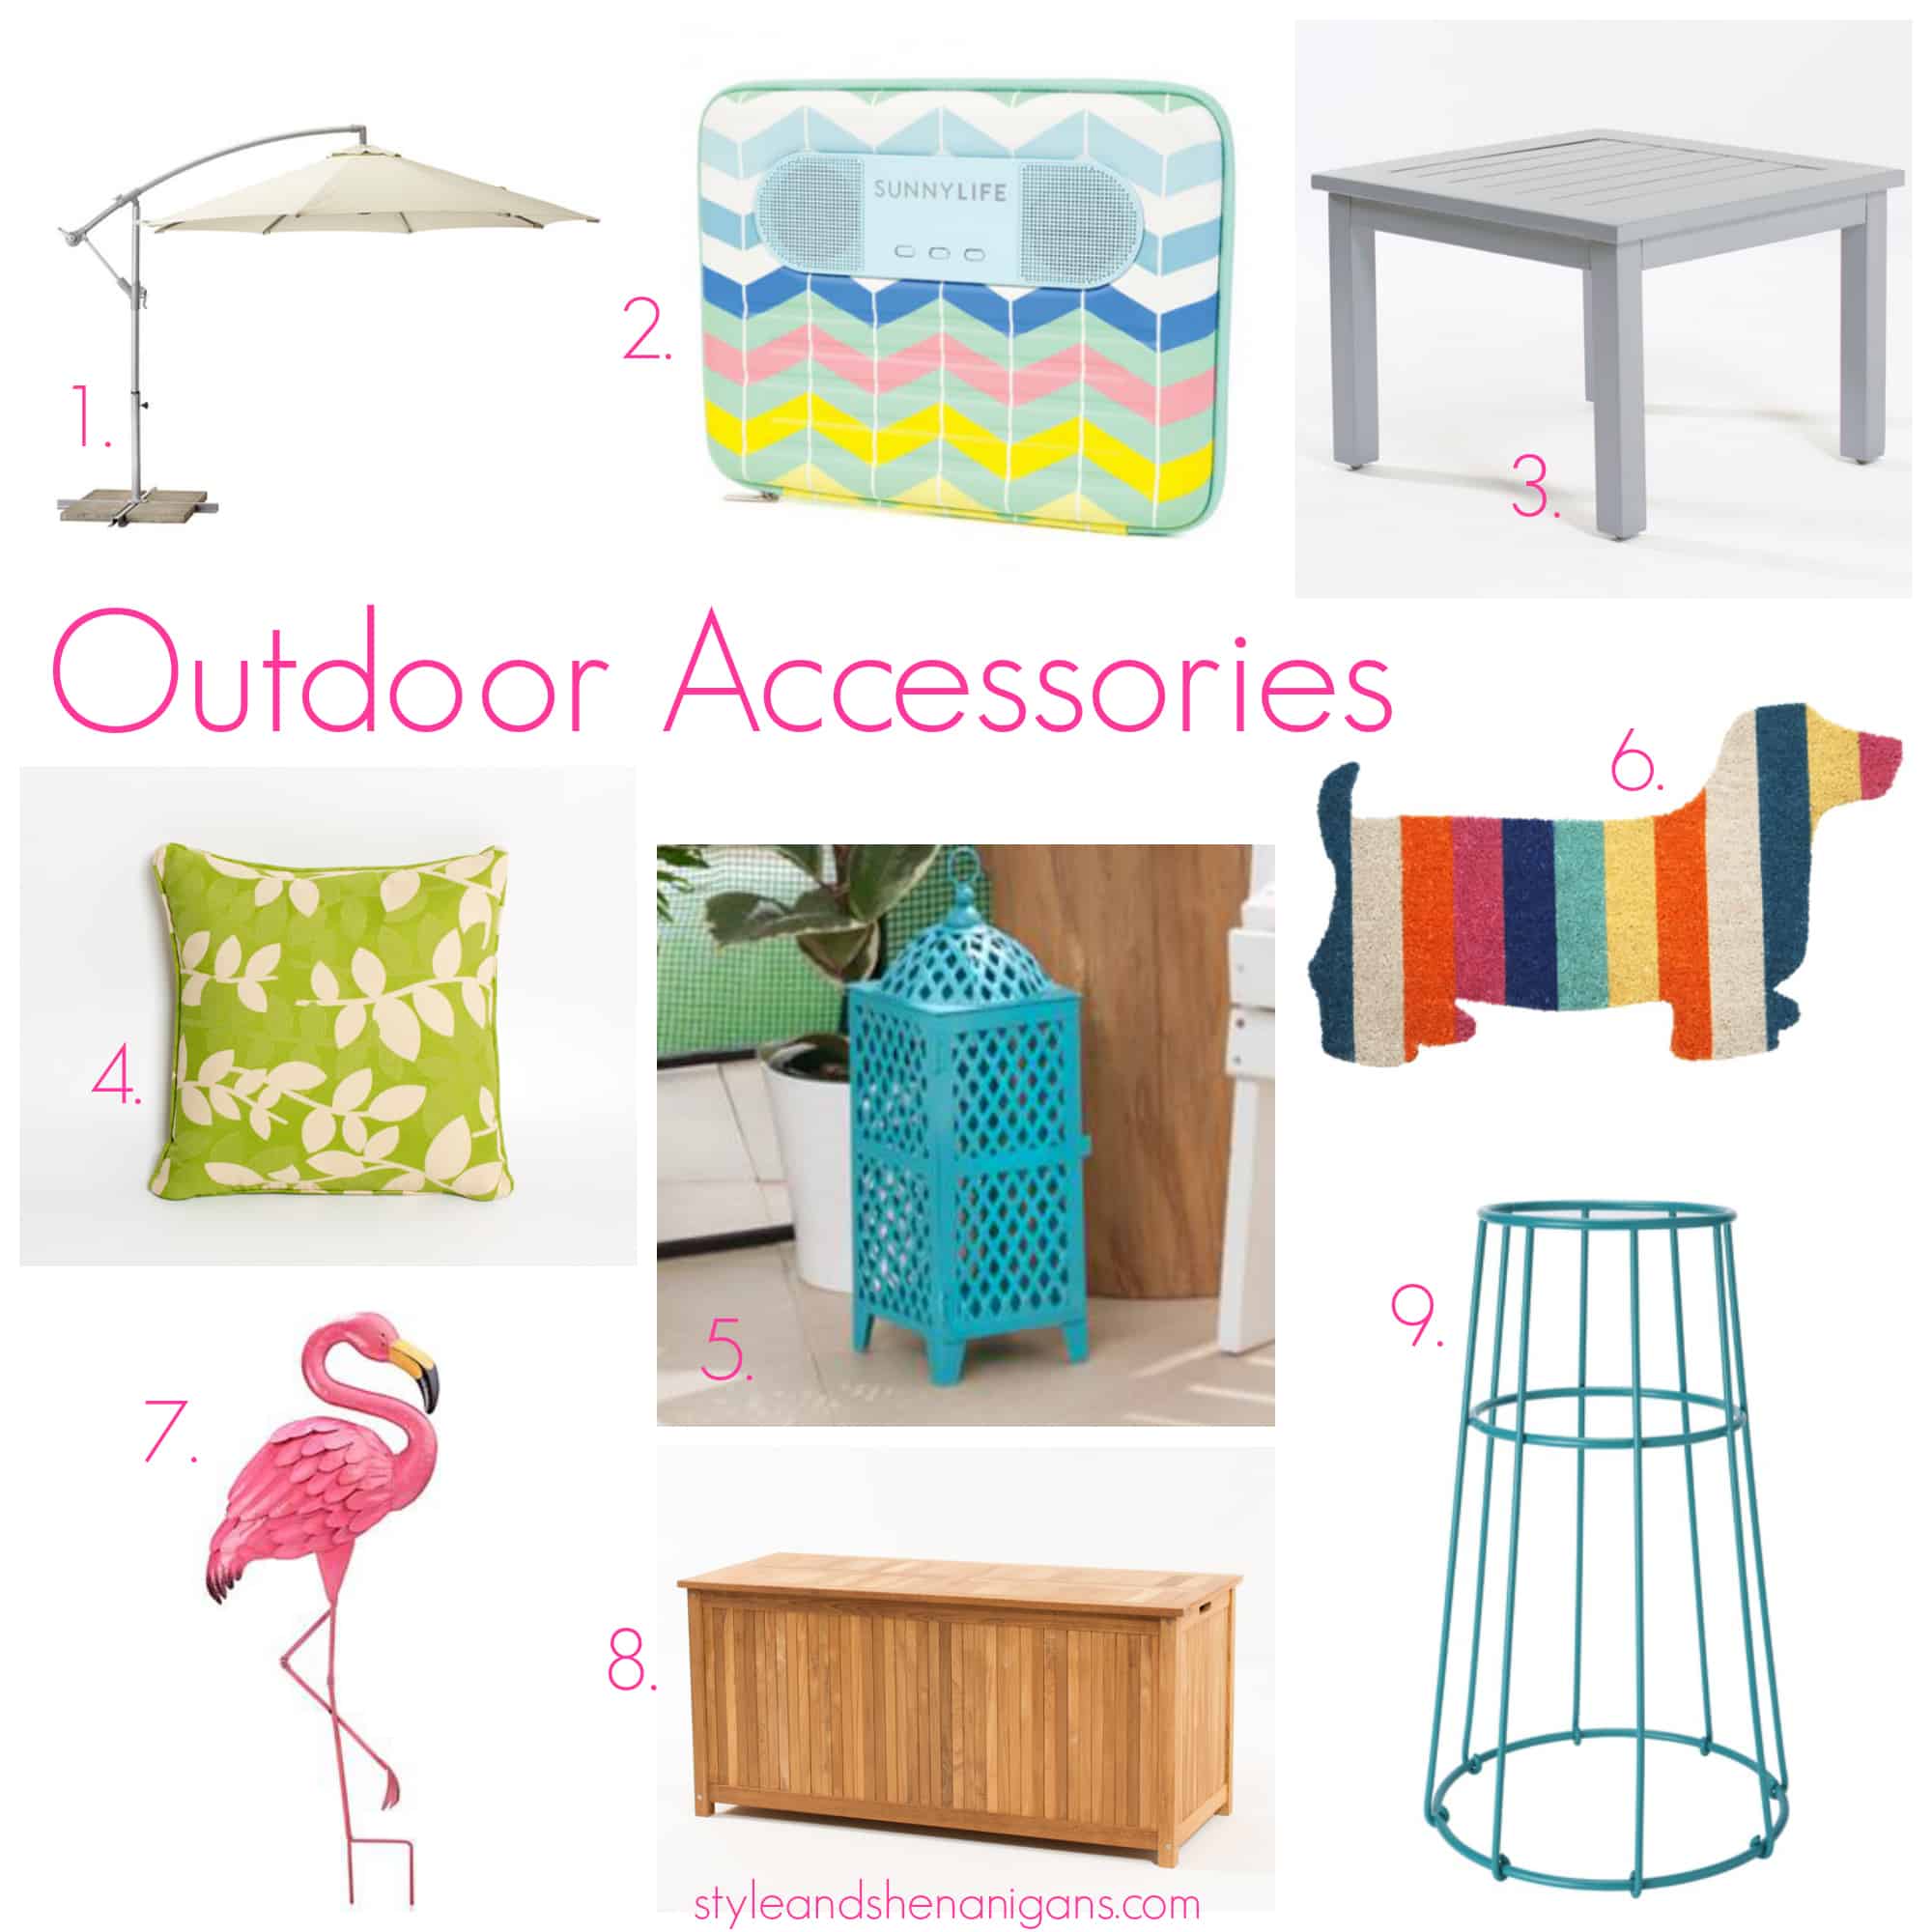 What You Need to Know When Shopping For Outdoor Living Accessories